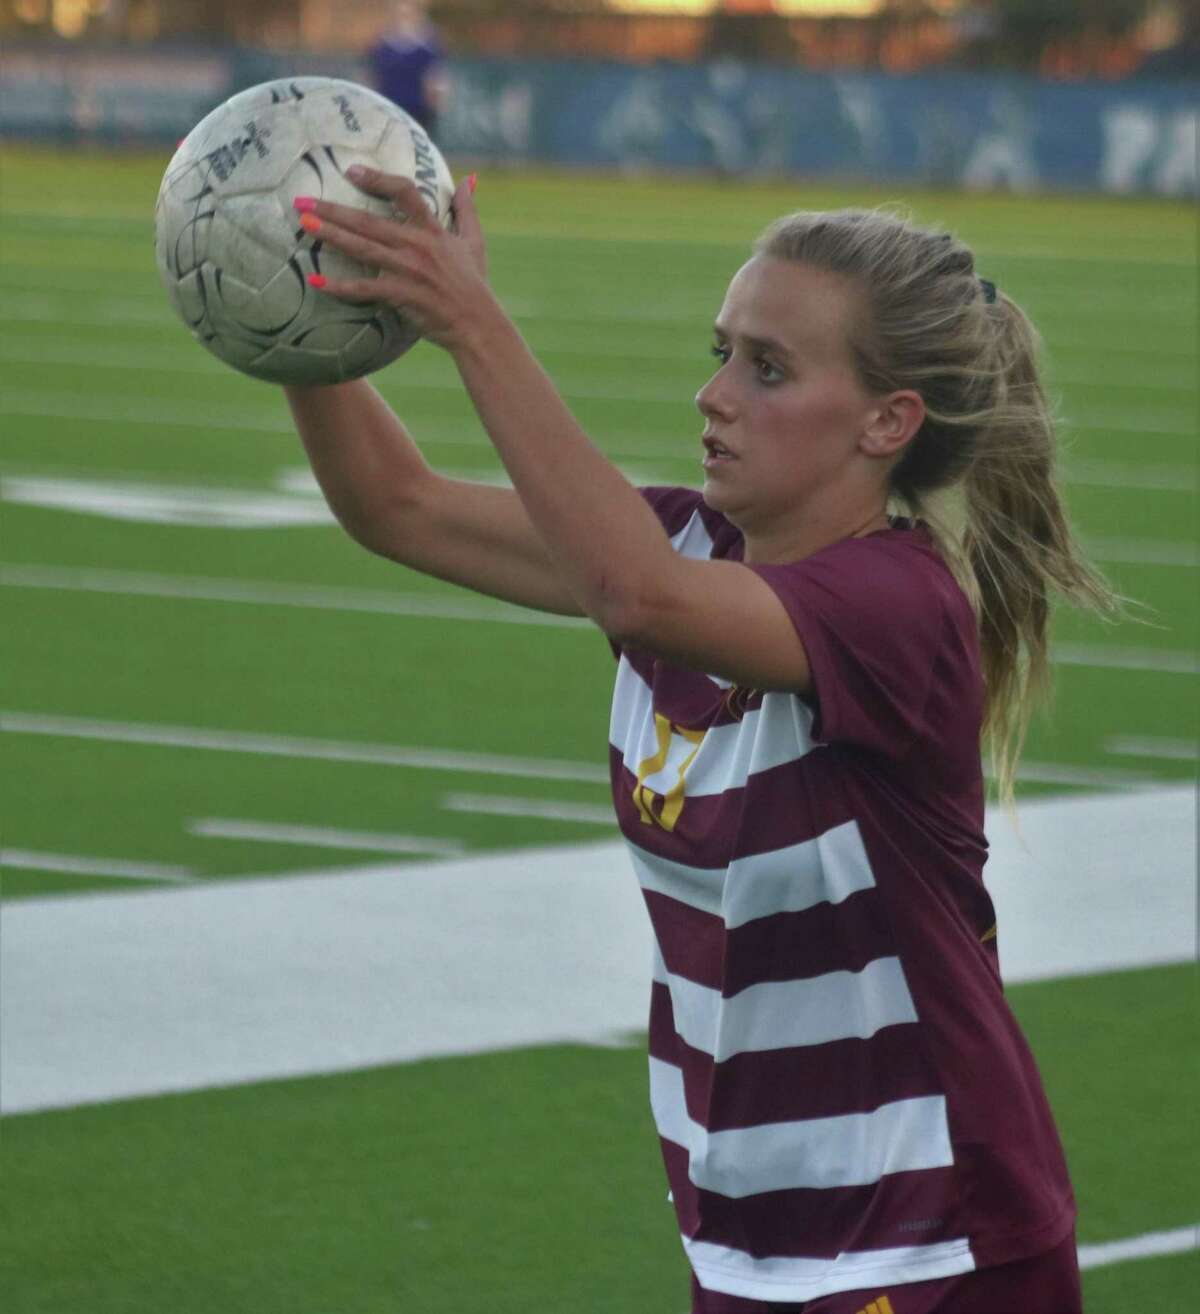 Audrey Addison eyes a teammate for the throw-in during second-half action in their state playoff match Thursday night.